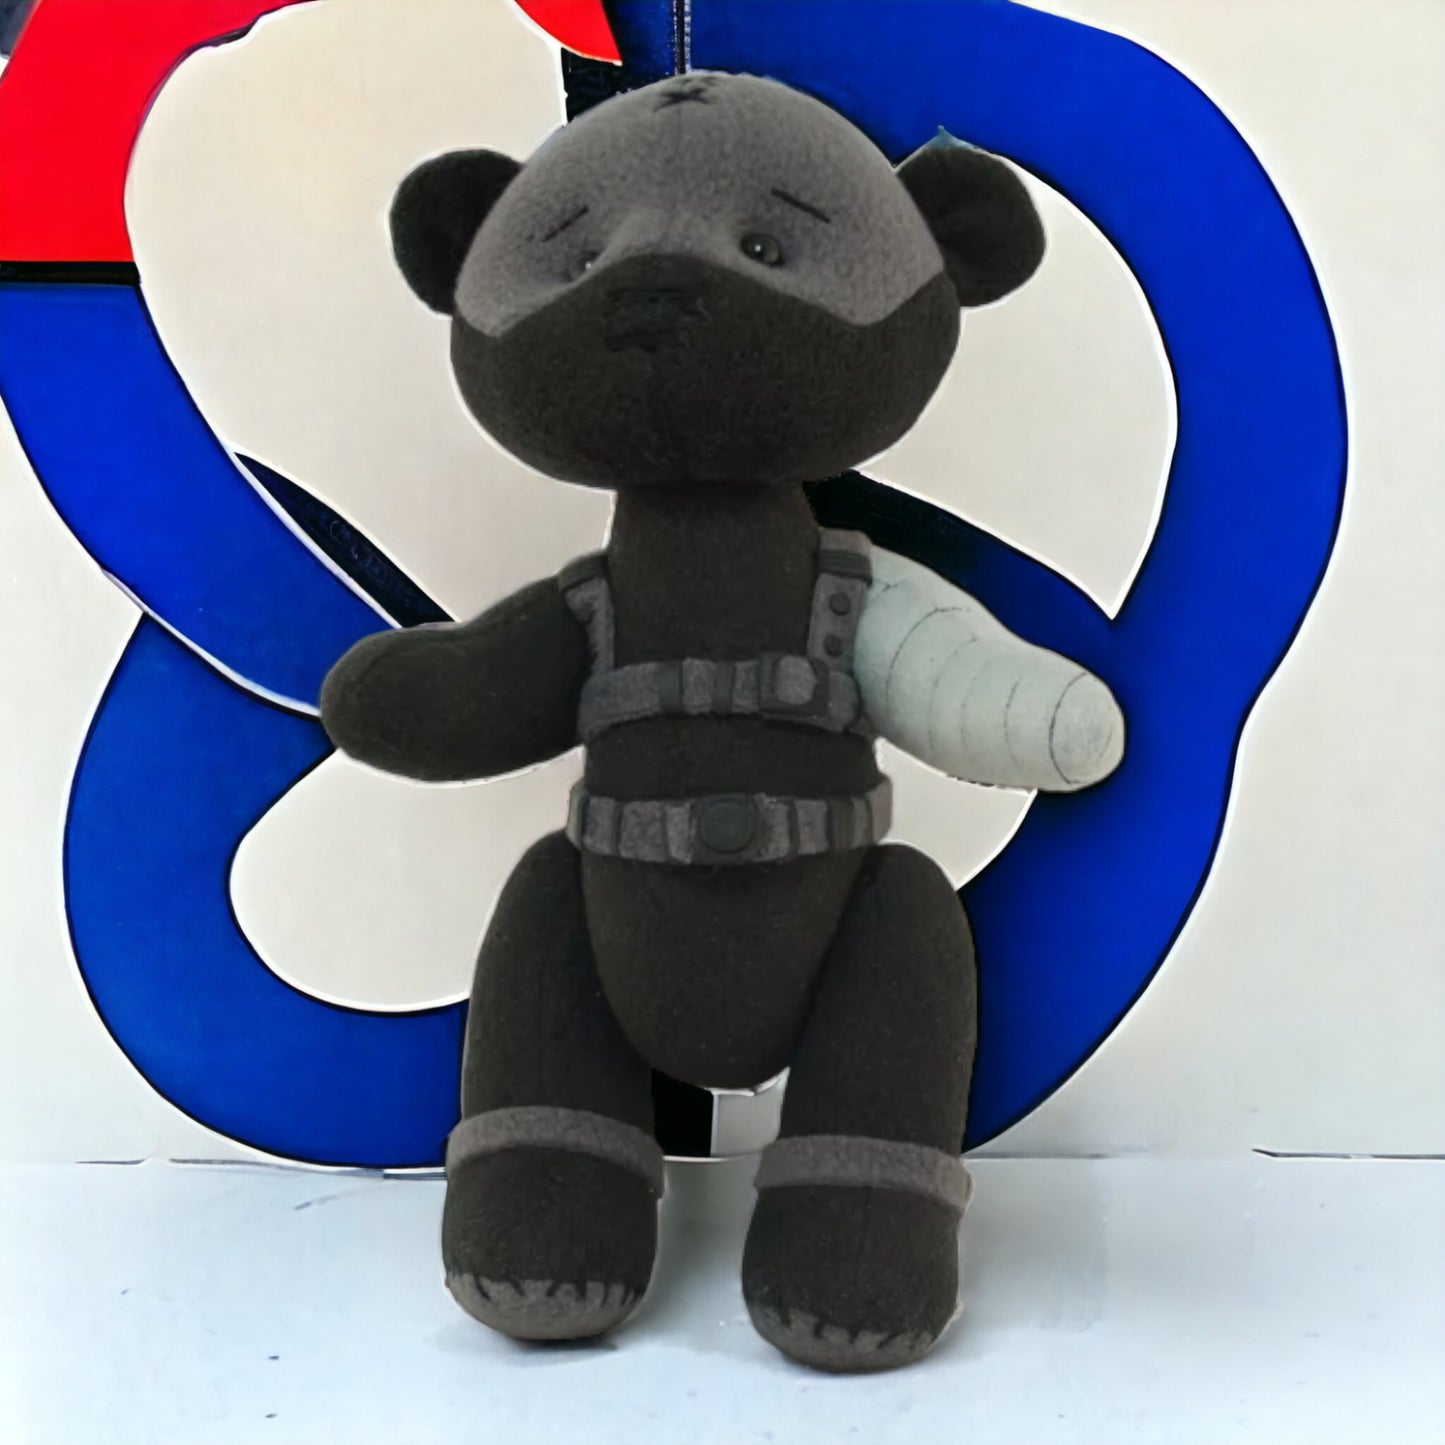 Bucky The Soldier Super Teddy